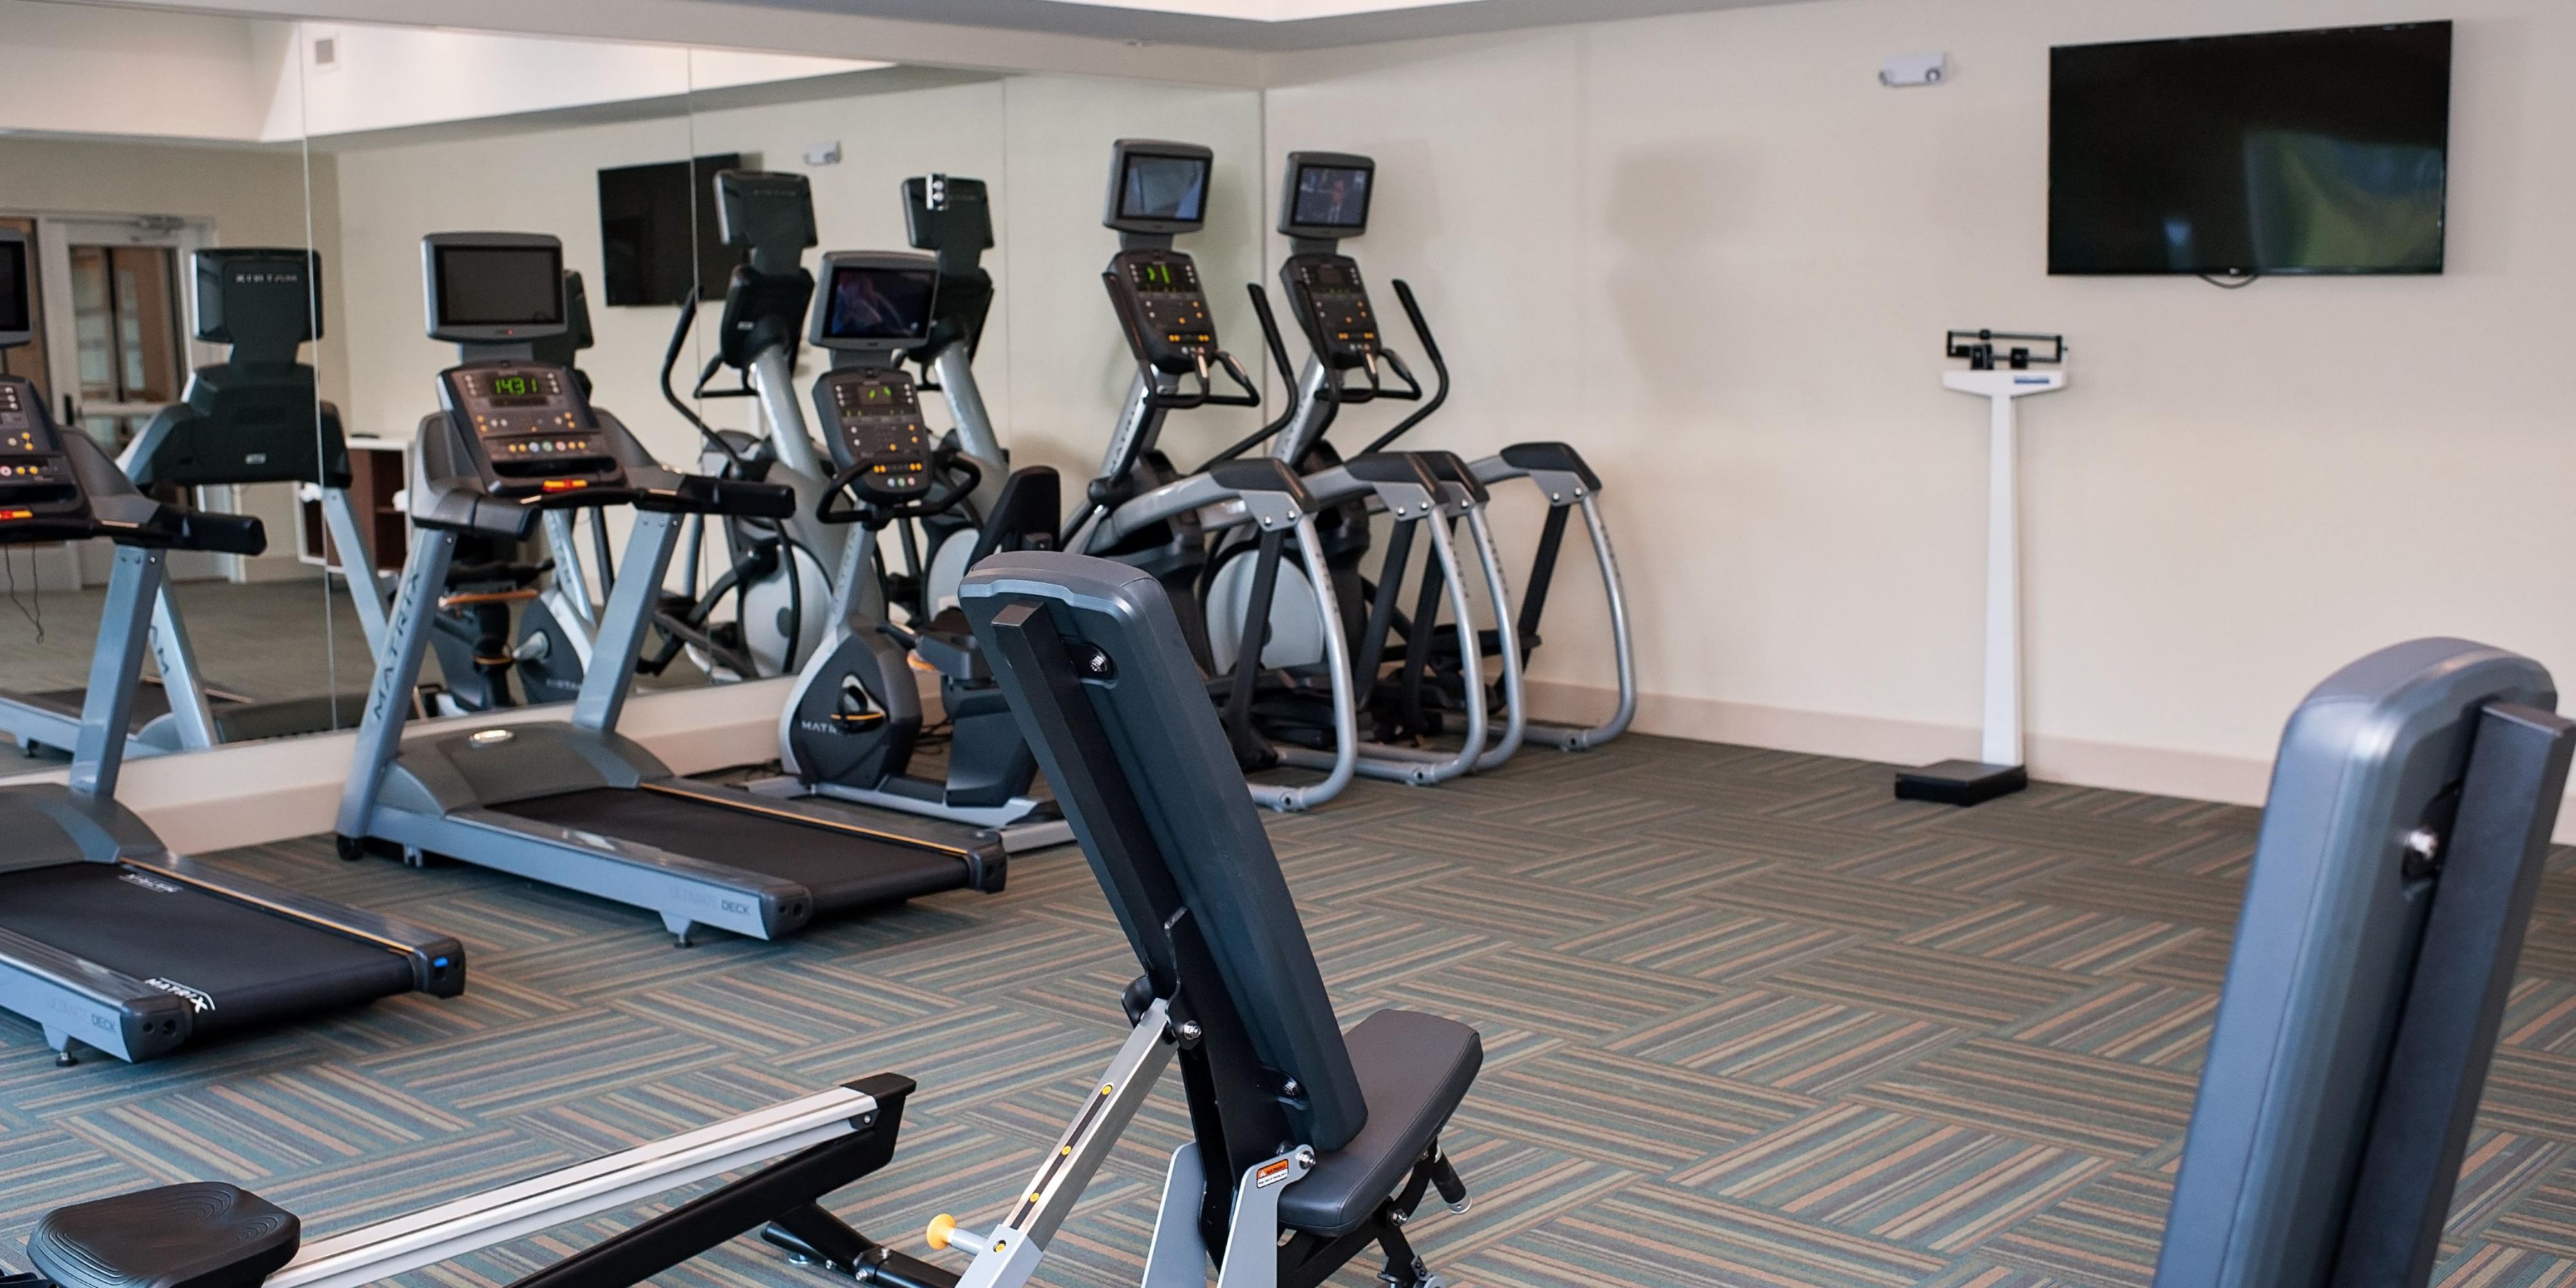 Whether you are starting your day or ending your day, we have everything you need for a great workout.  We feature treadmills, elliptical machines, free weights and a stationary bike.